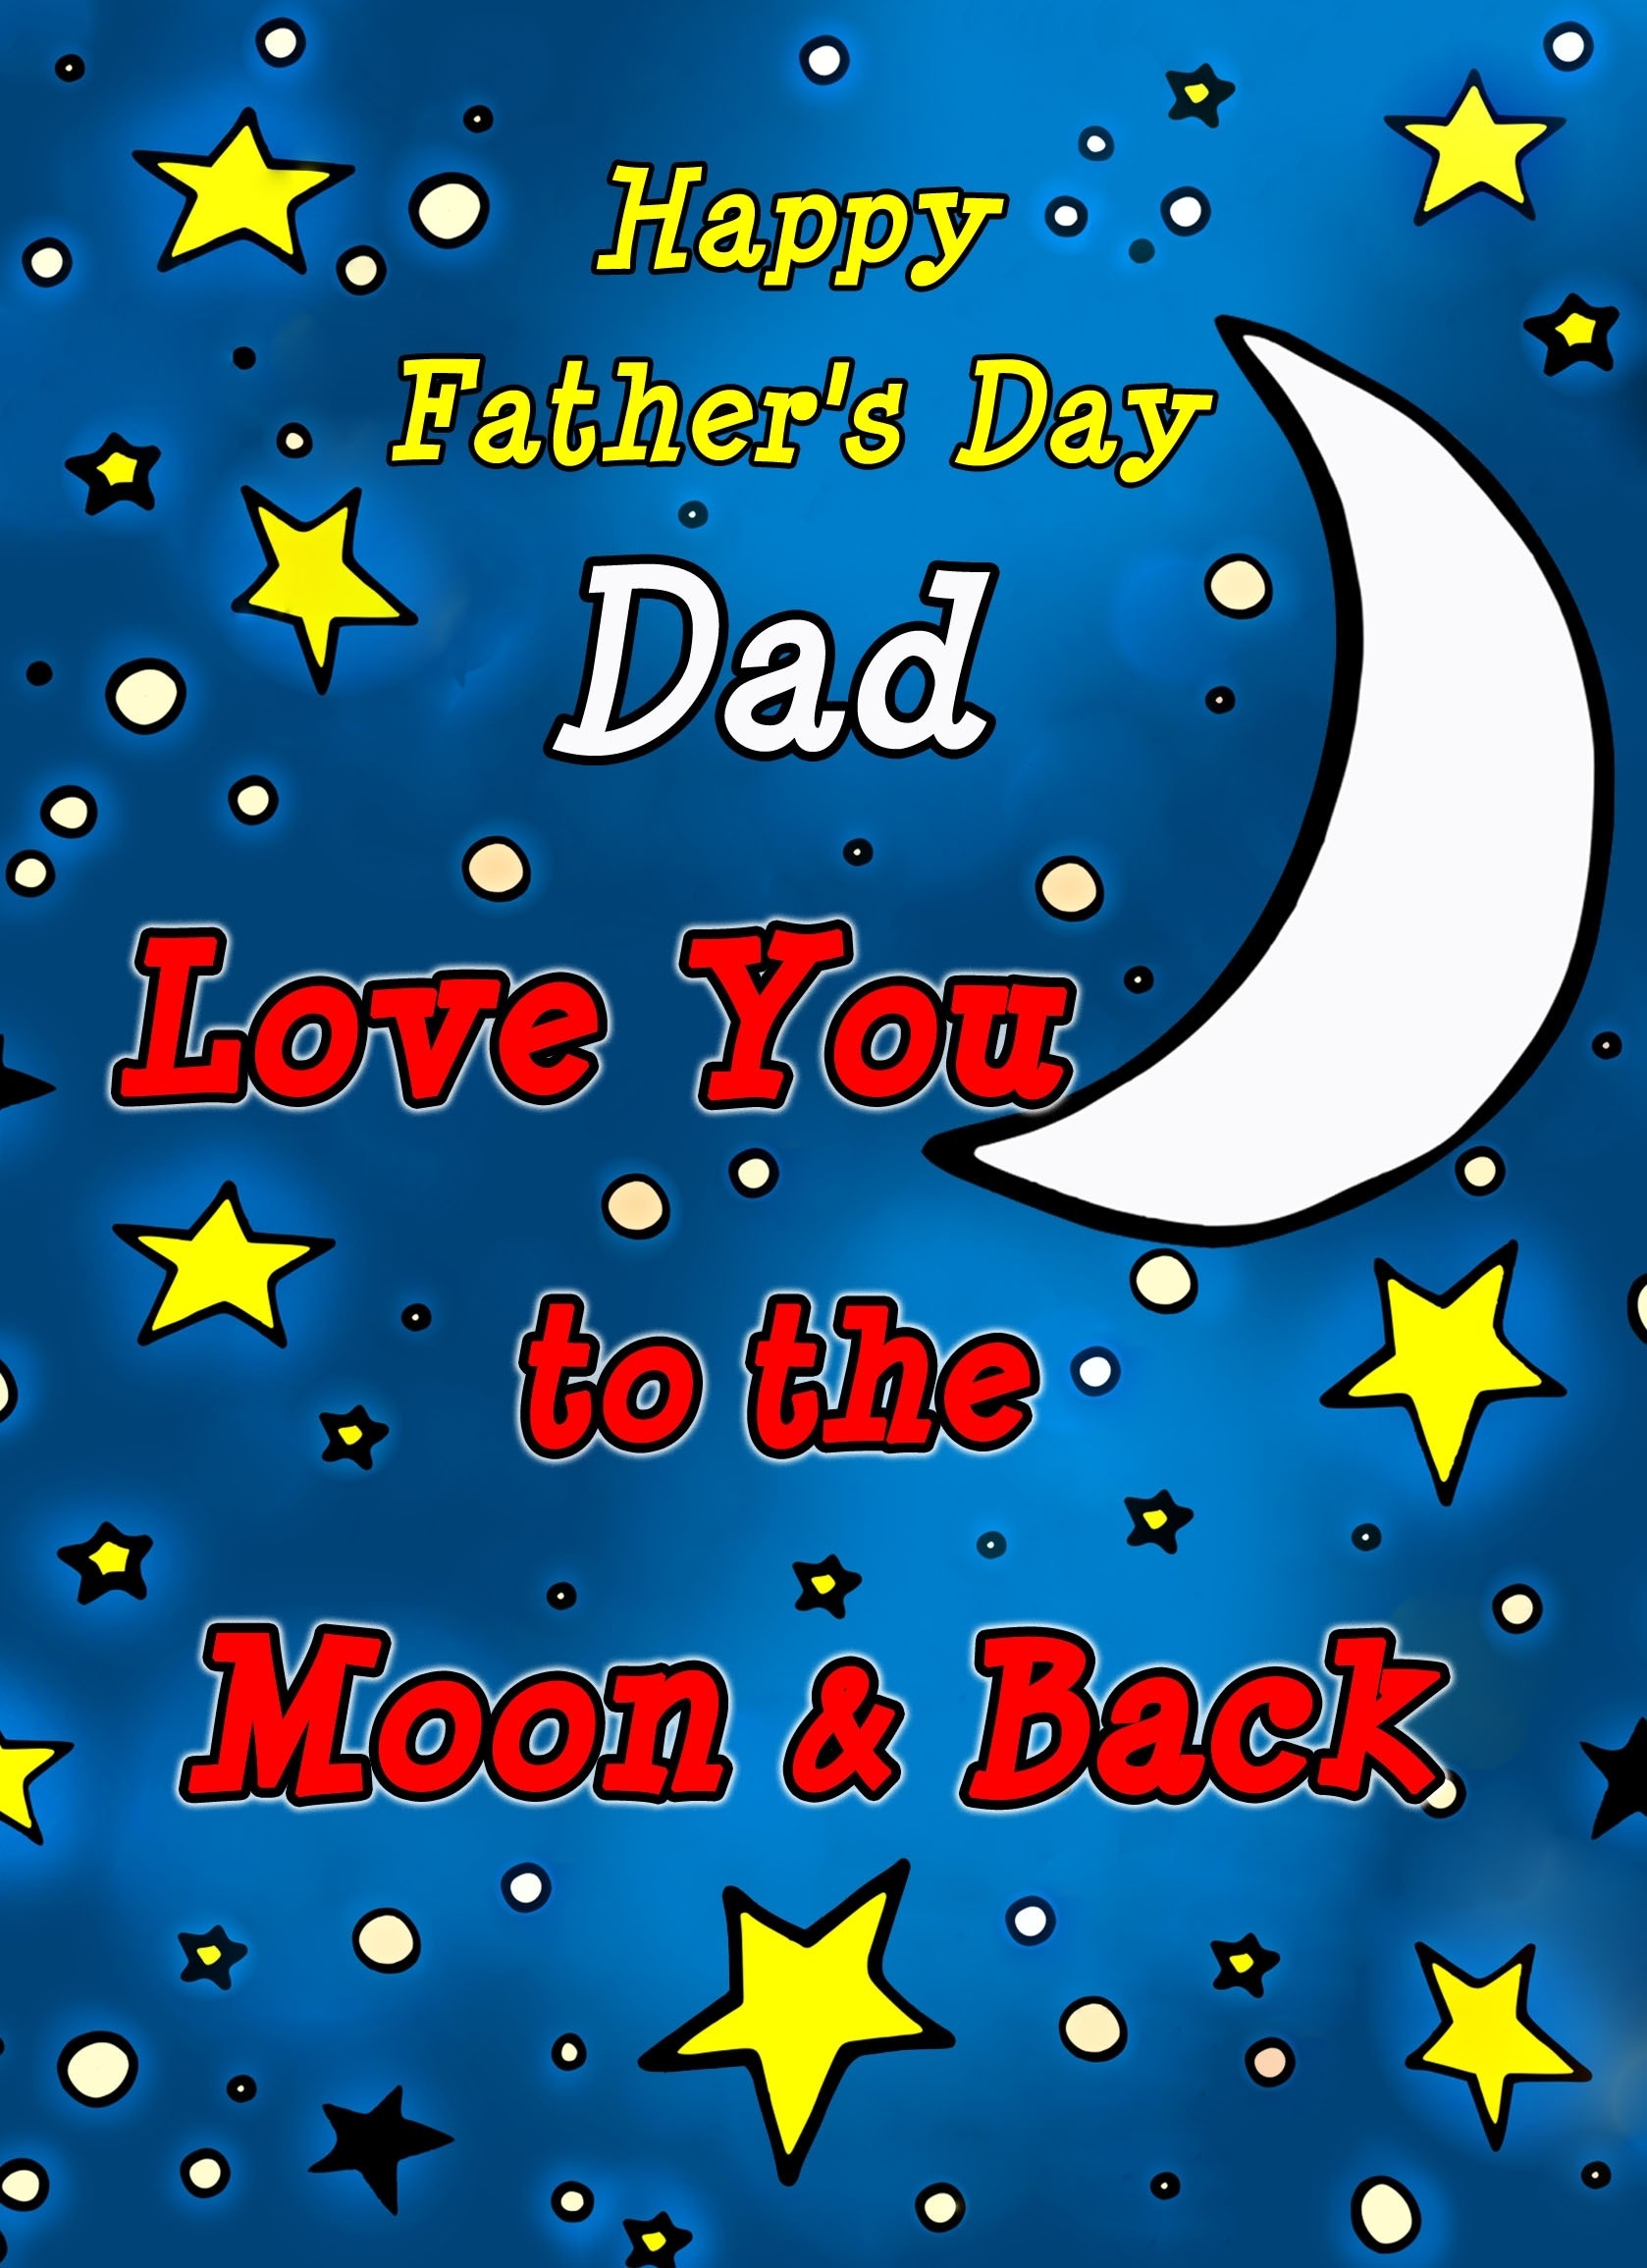 Fathers Day Card (Dad, Moon & Back)